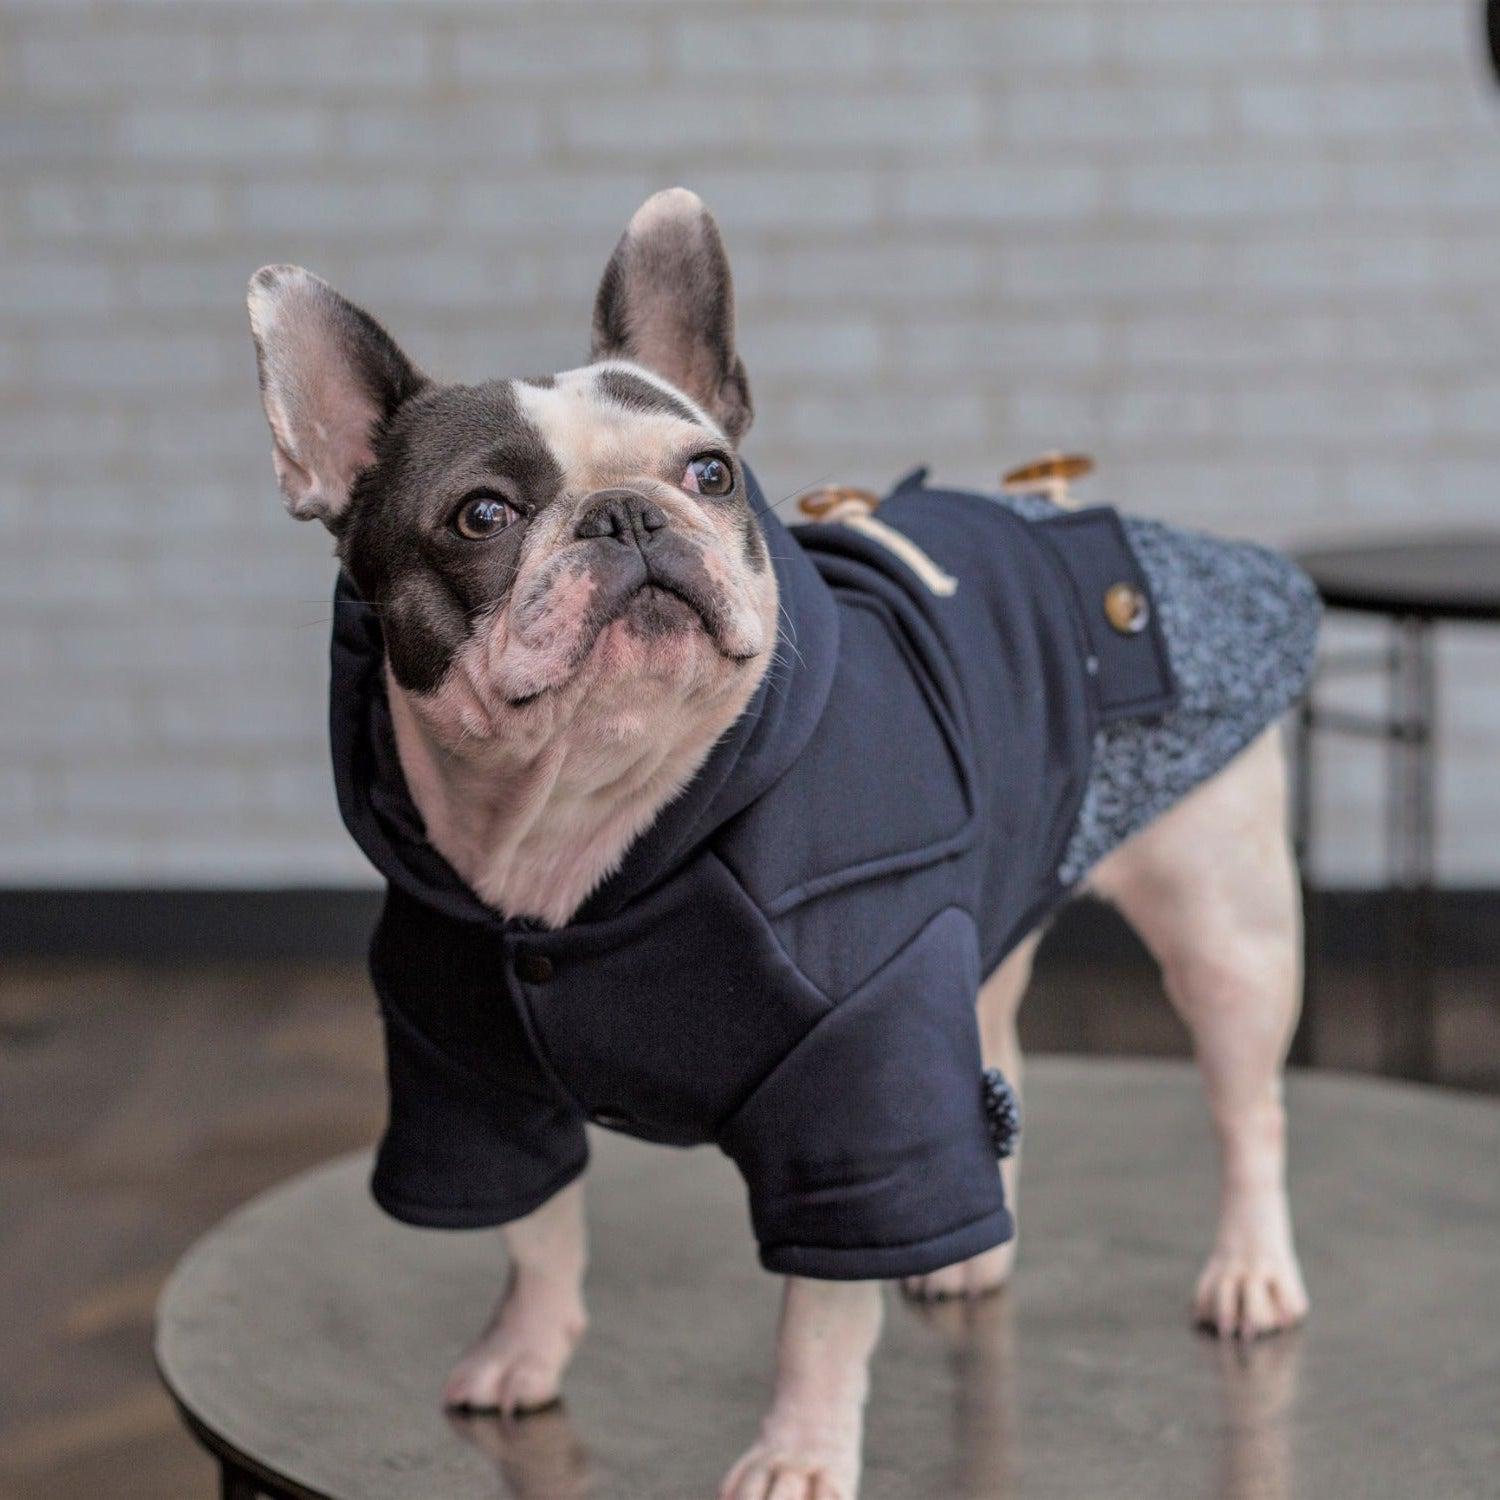 Buttoned Dog Hoodie Coat